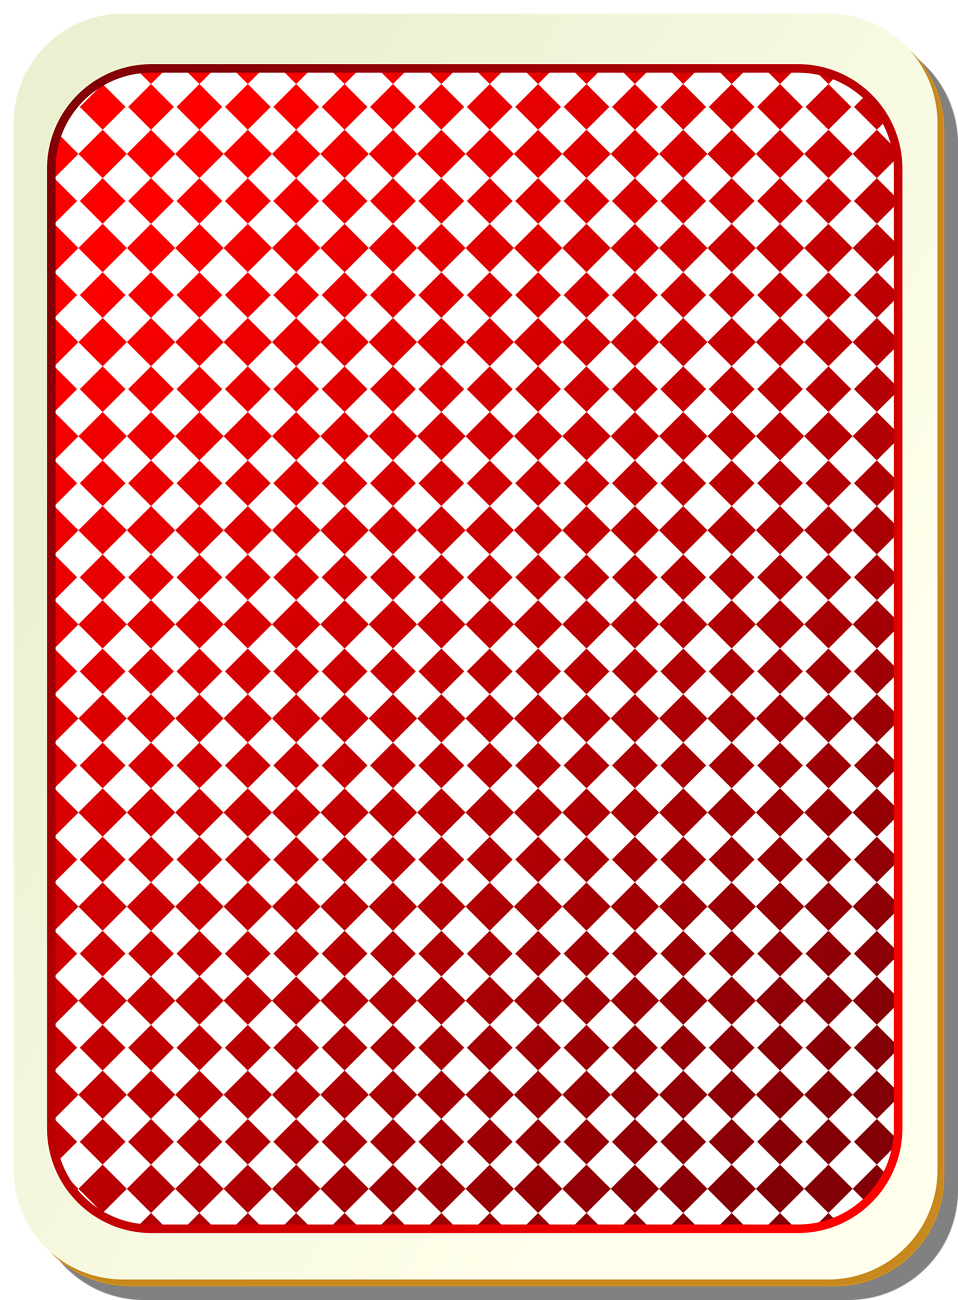 Playing Cards | Free Stock Photo | Illustration of a play card 